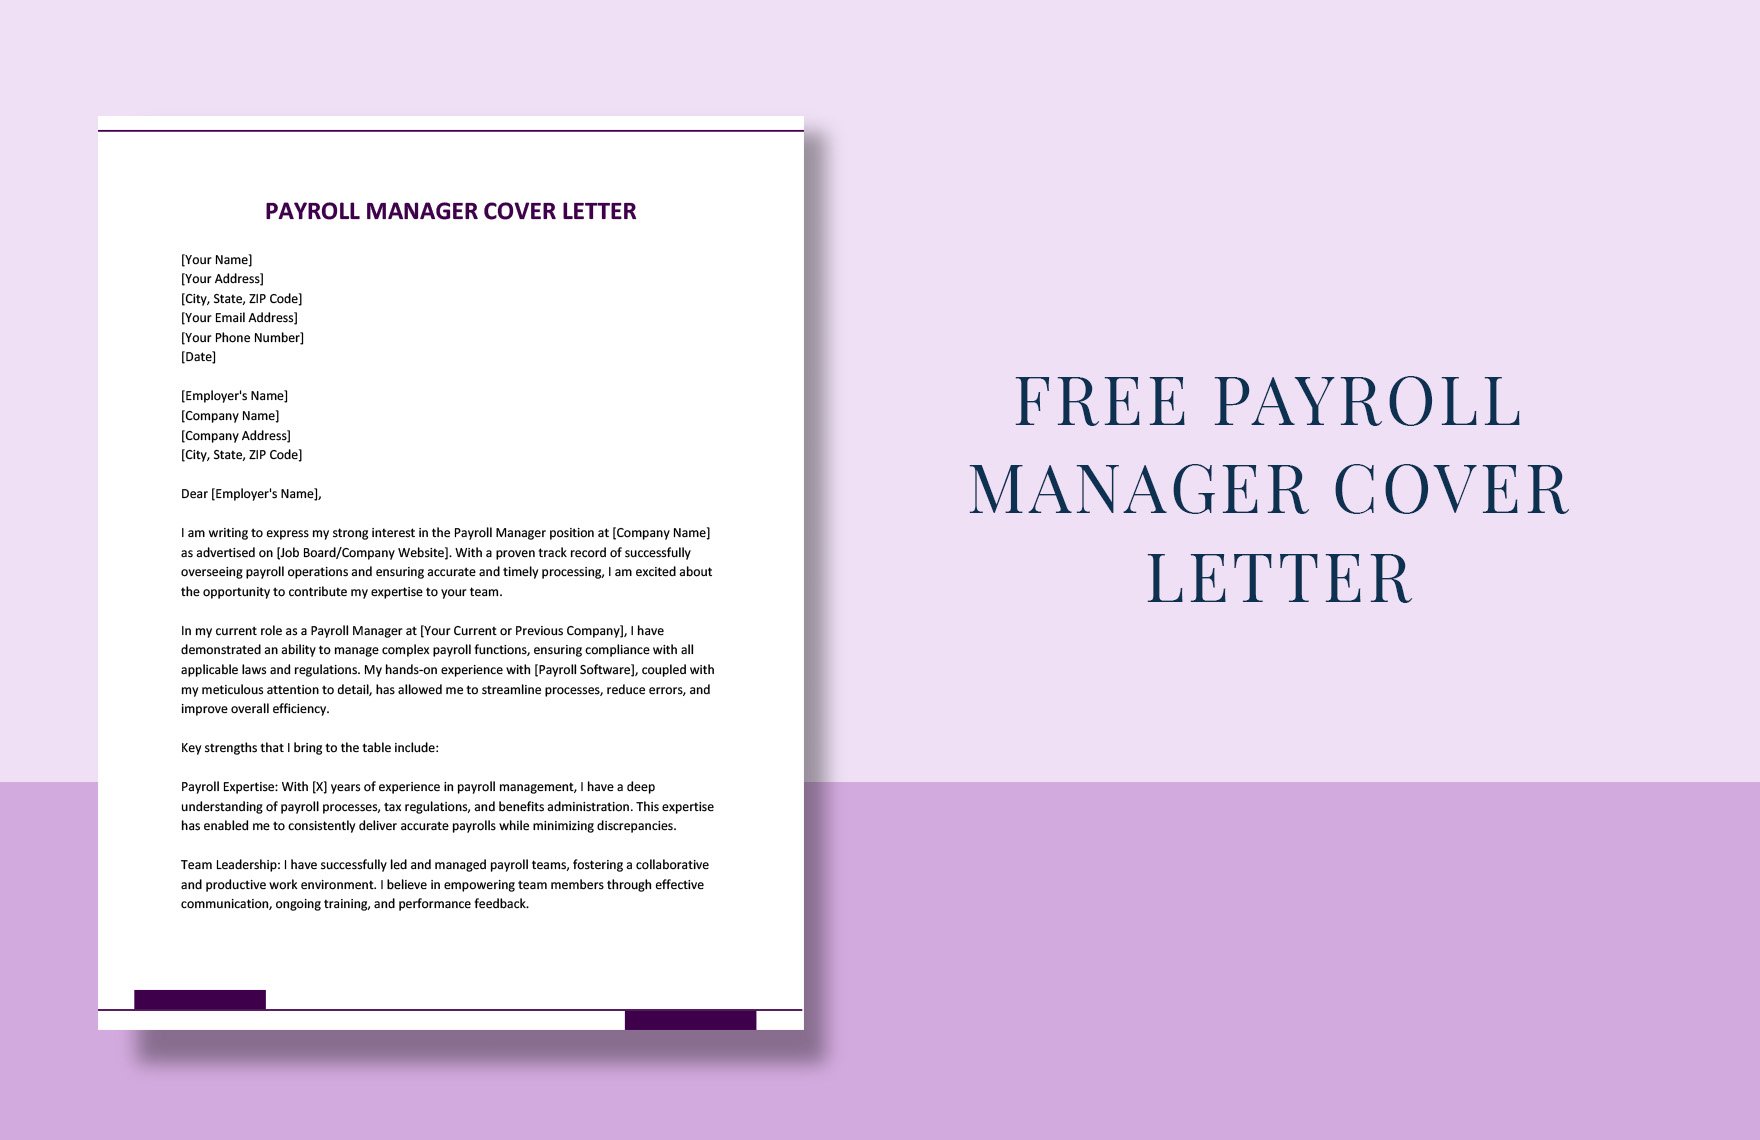 Payroll Manager Cover Letter in Word, Google Docs